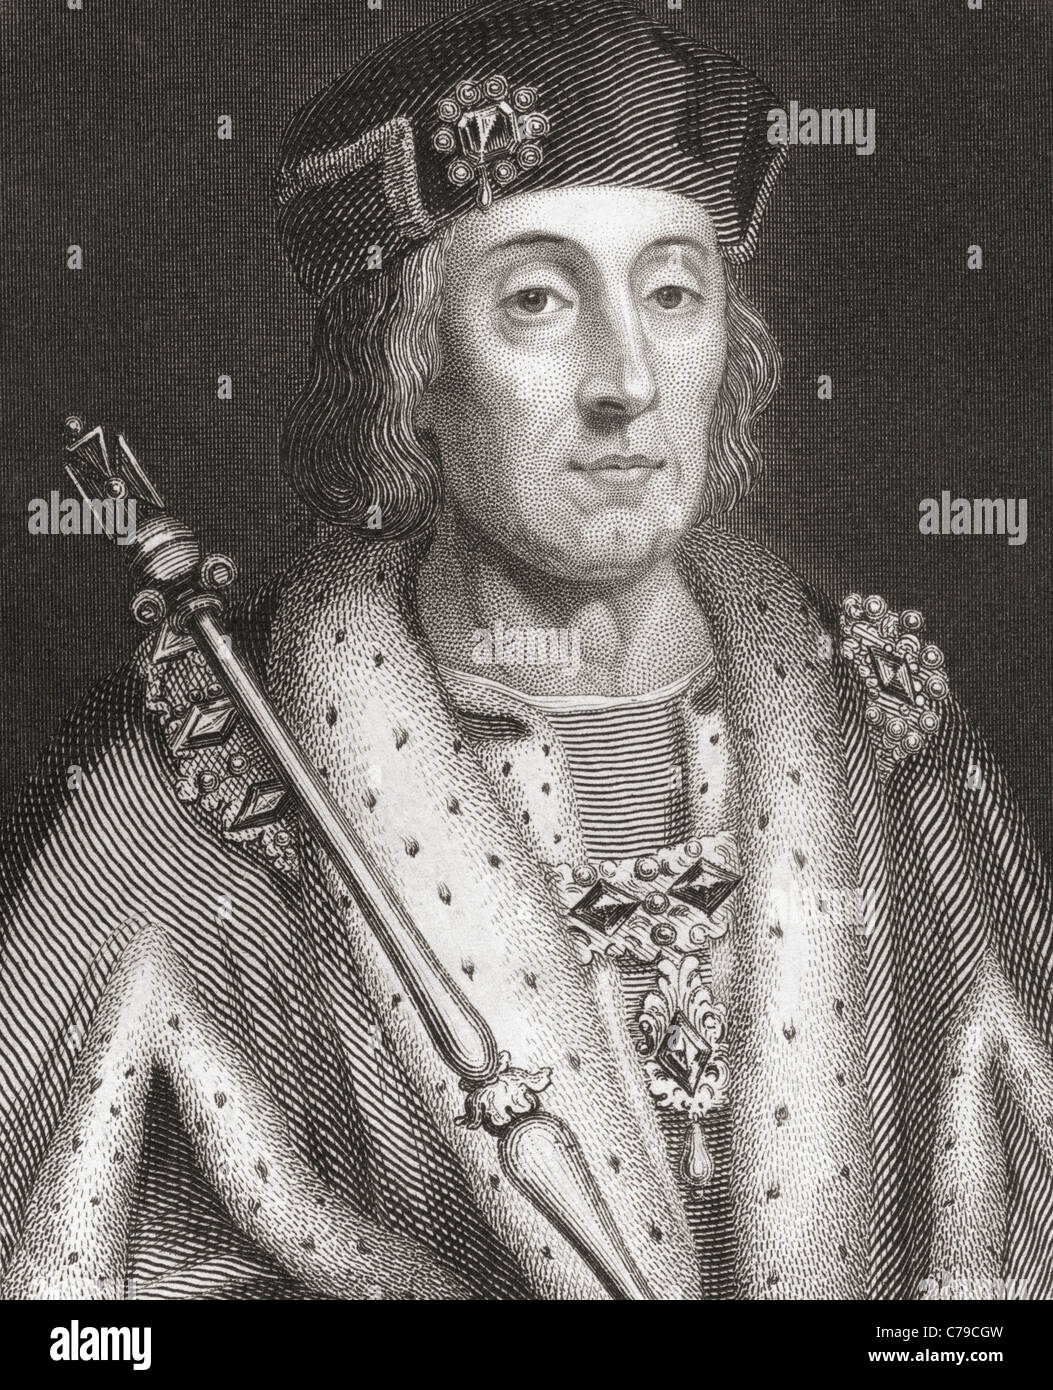 Henry VII, 1457 – 1509. King of England and Lord of Ireland. Stock Photo